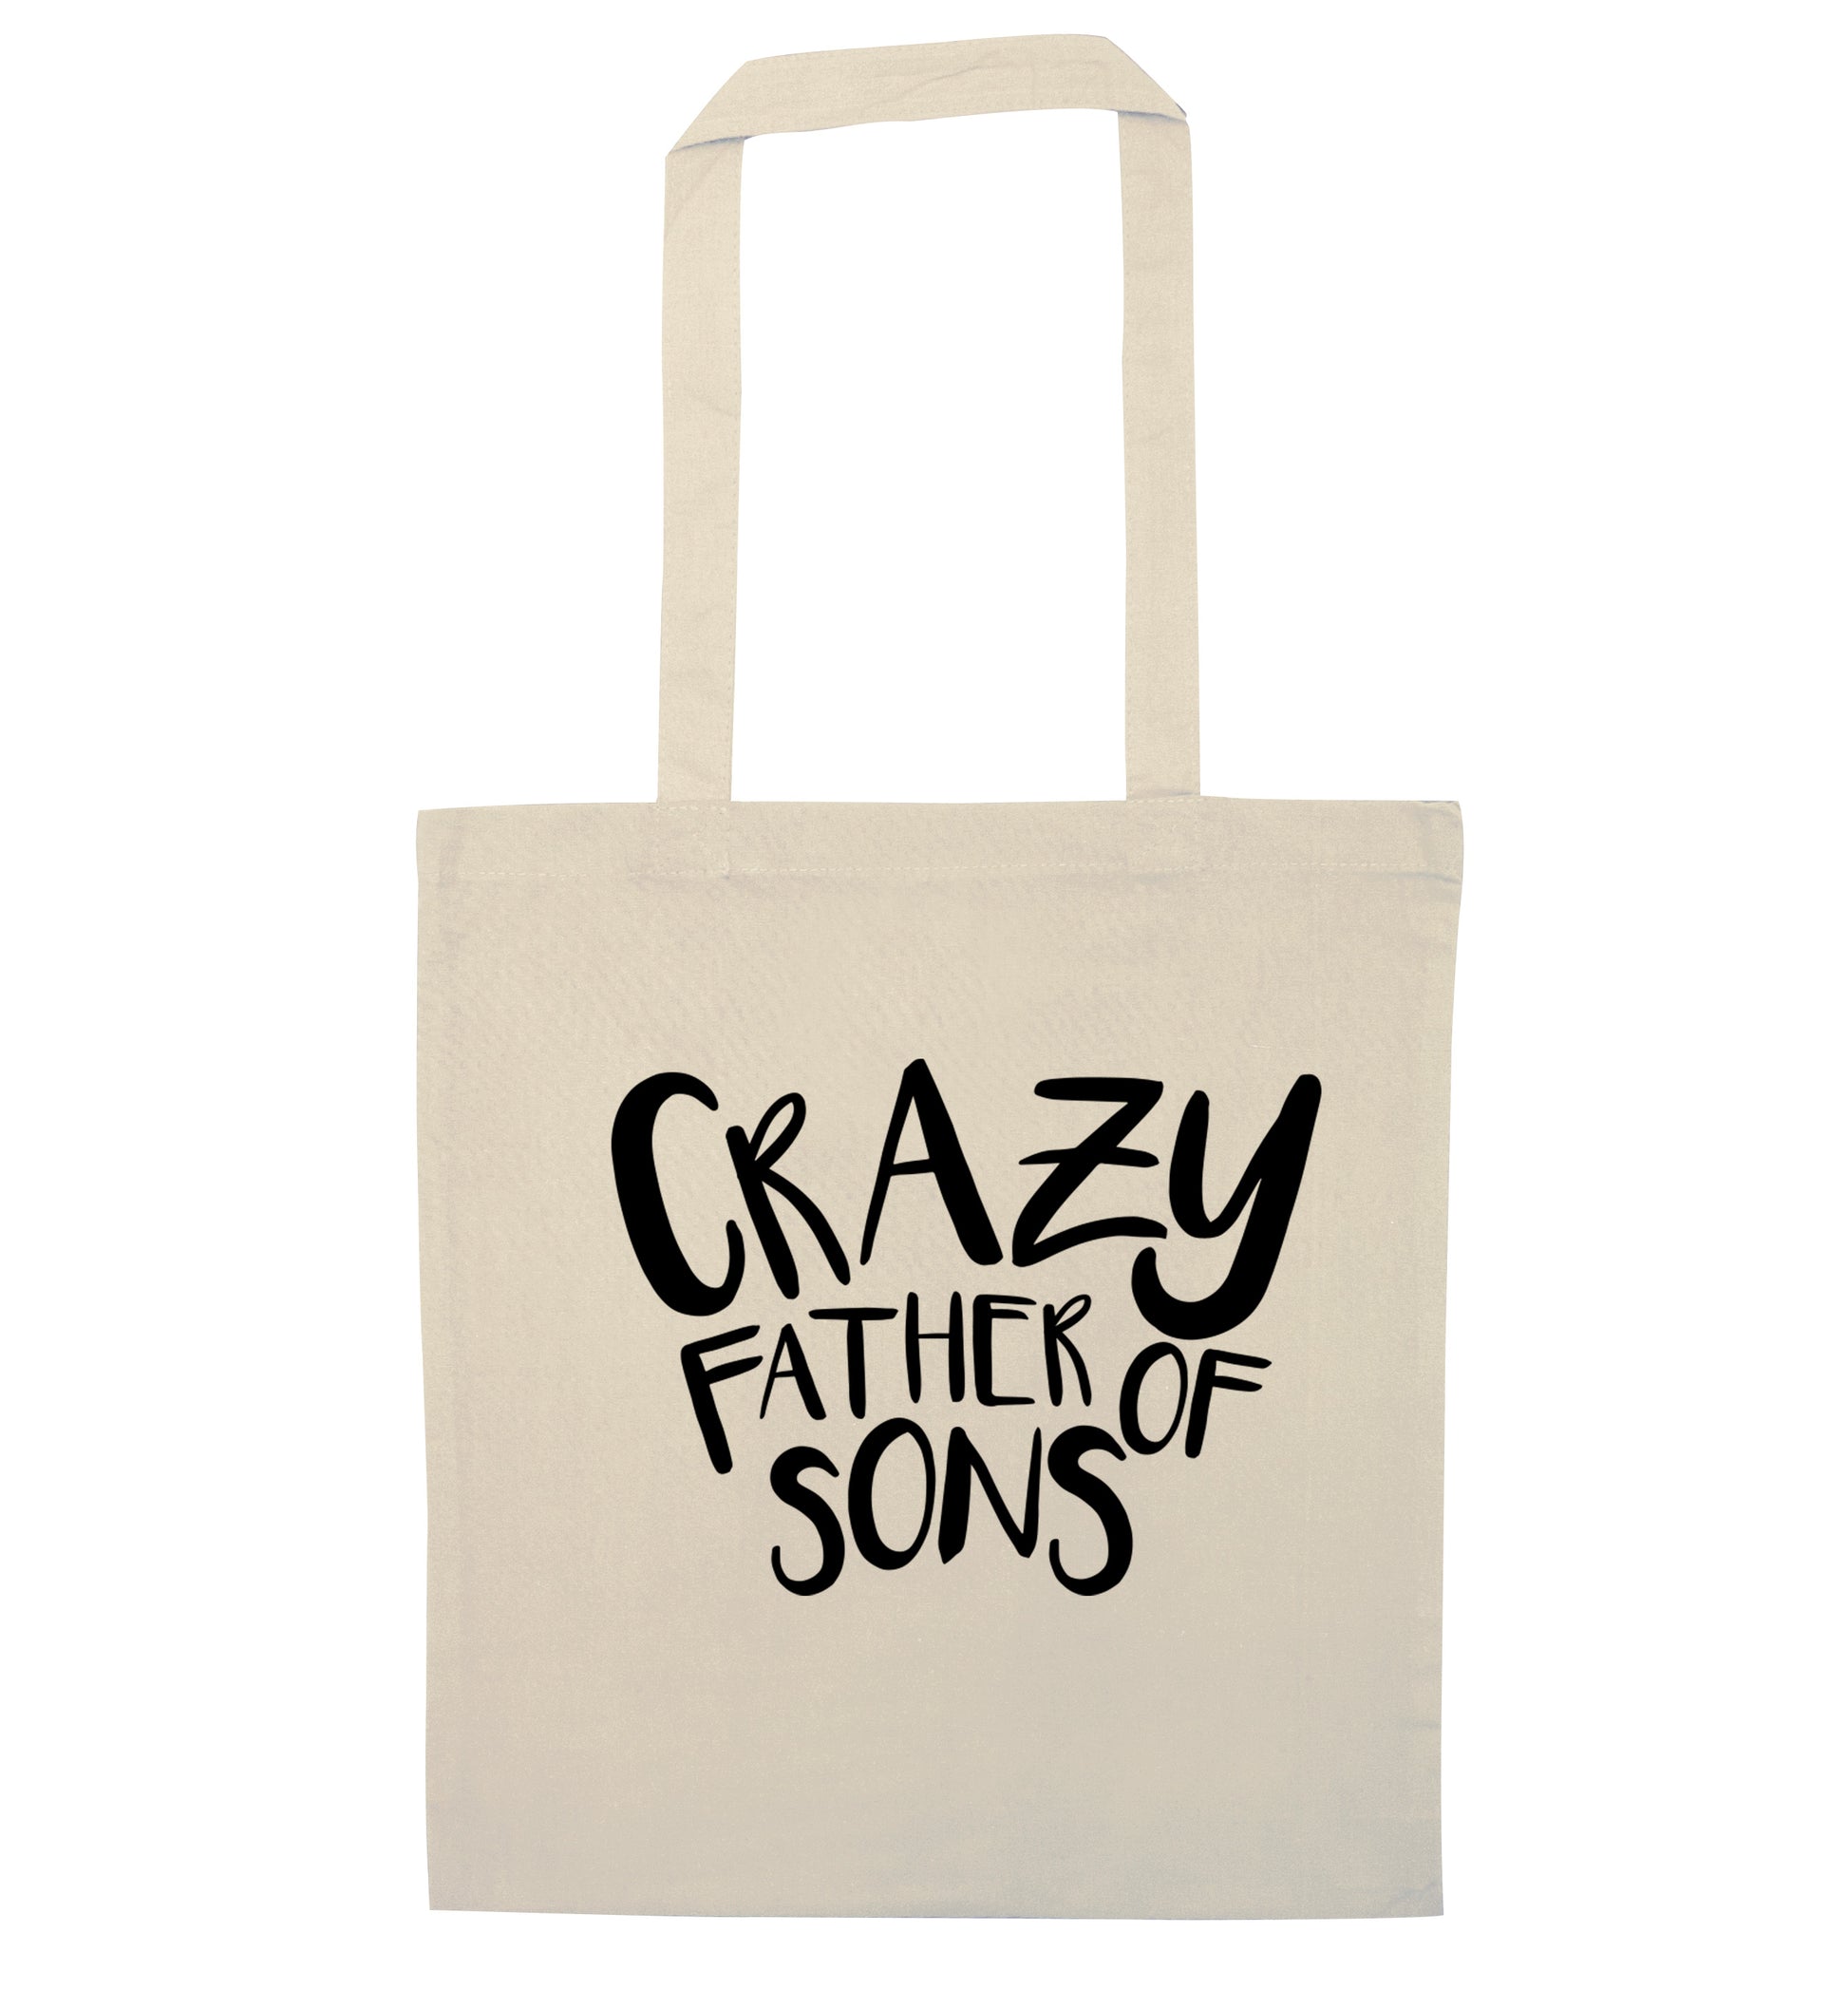 Crazy father of sons natural tote bag